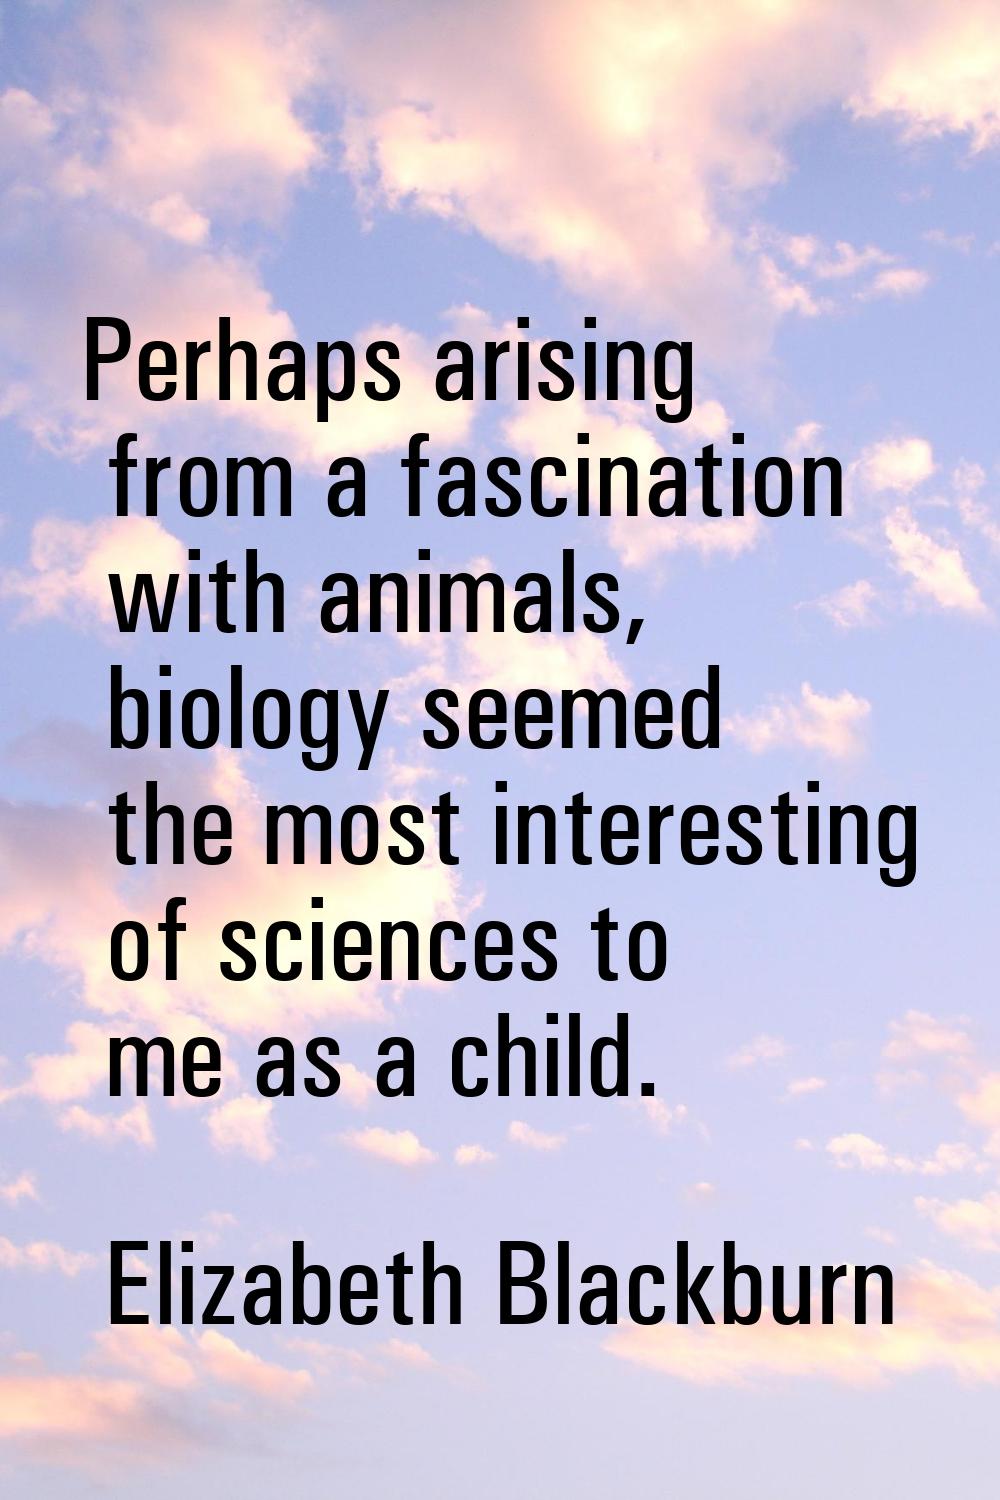 Perhaps arising from a fascination with animals, biology seemed the most interesting of sciences to